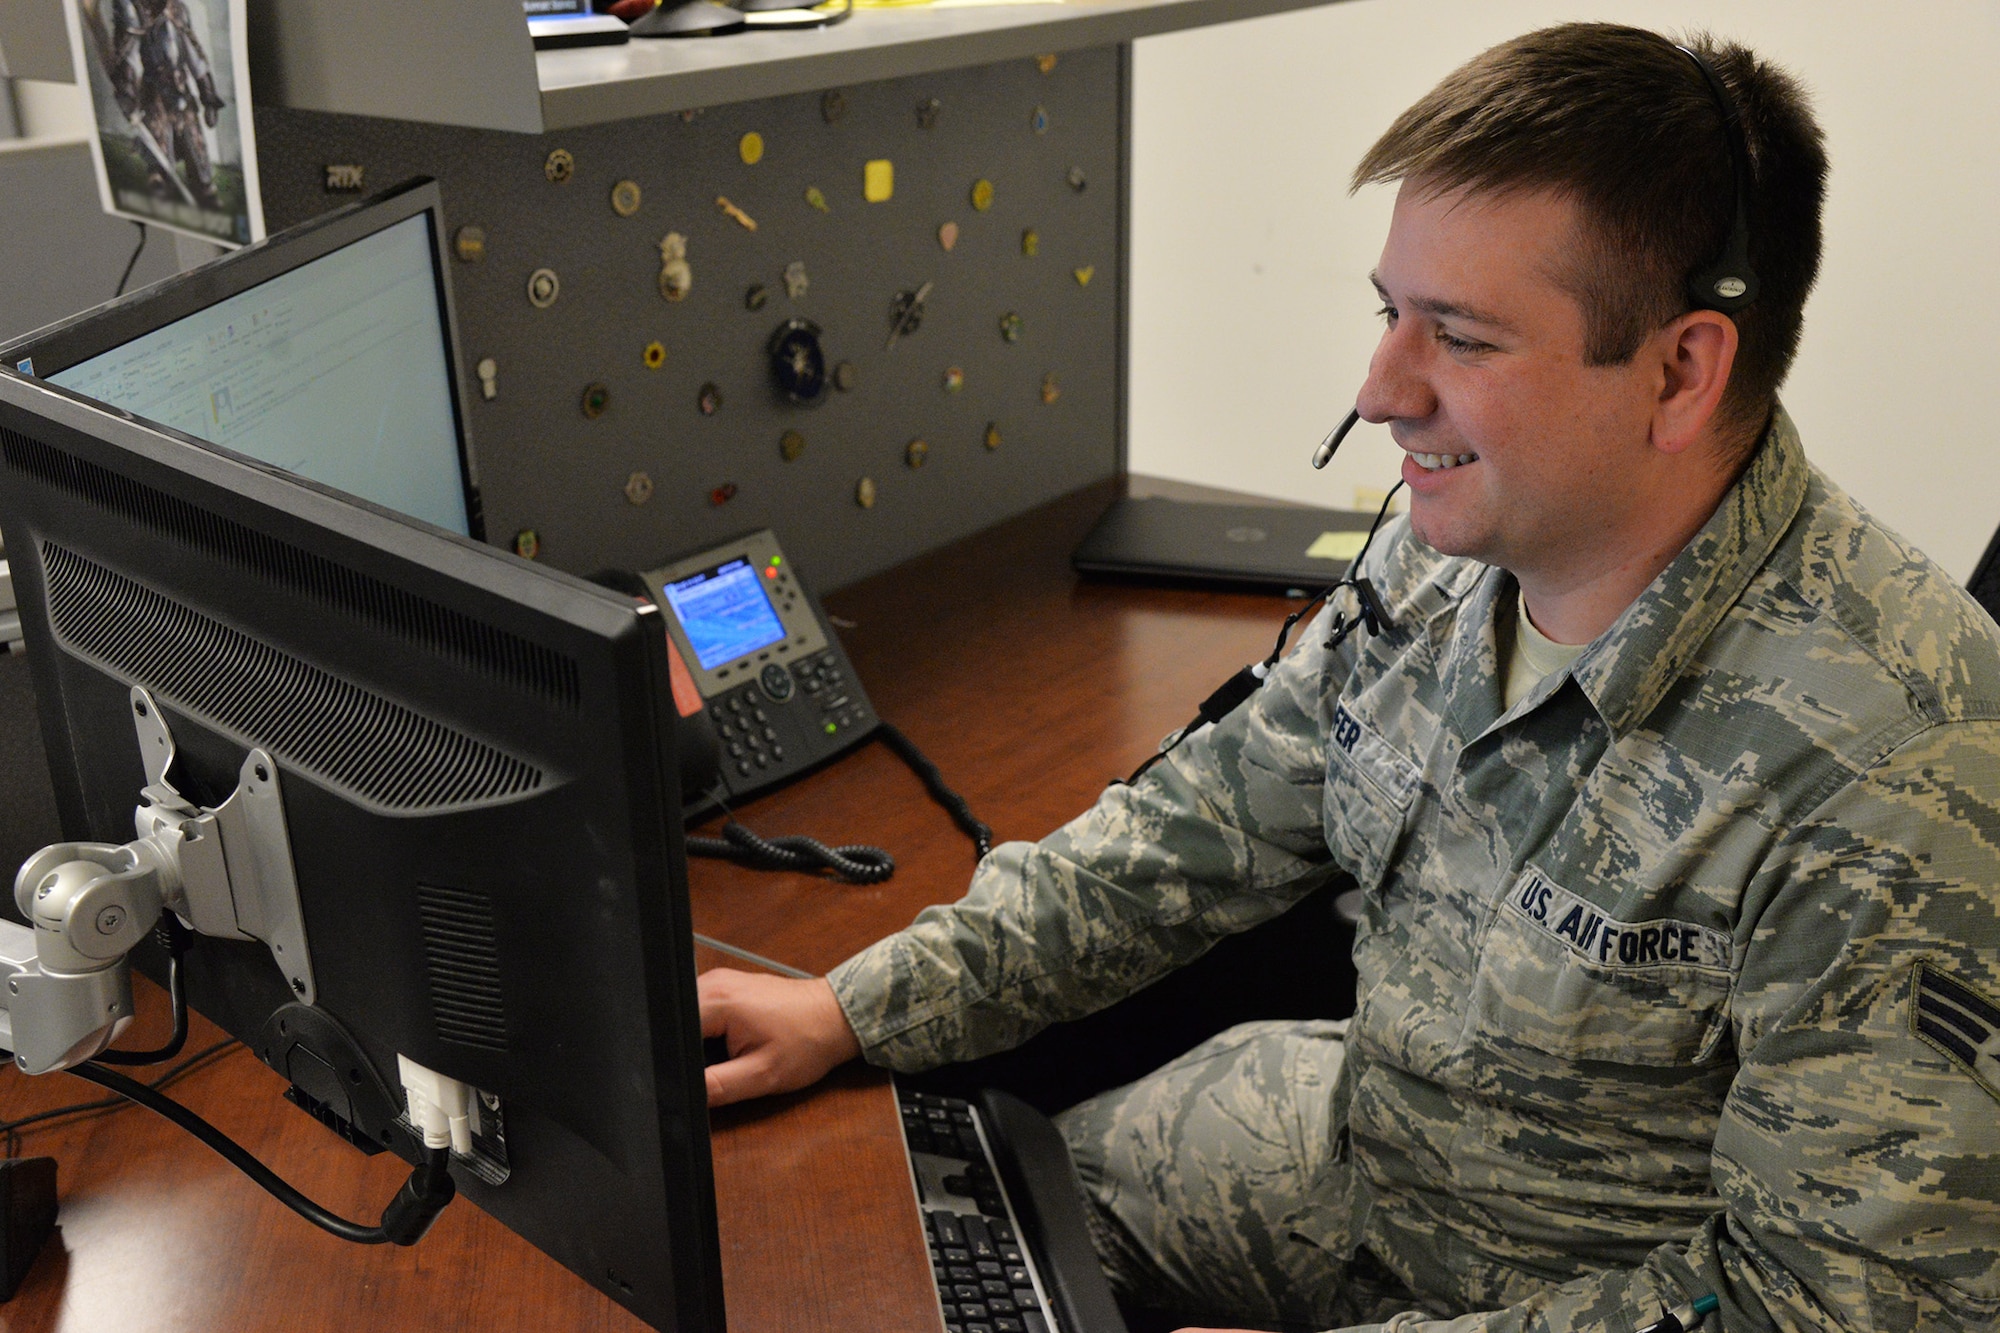 Senior Airman Jeffery Hofer, 341st Communications Squadron client support technician, speaks to a customer Nov. 13, 2017, at Malmstrom Air Force Base, Mont.